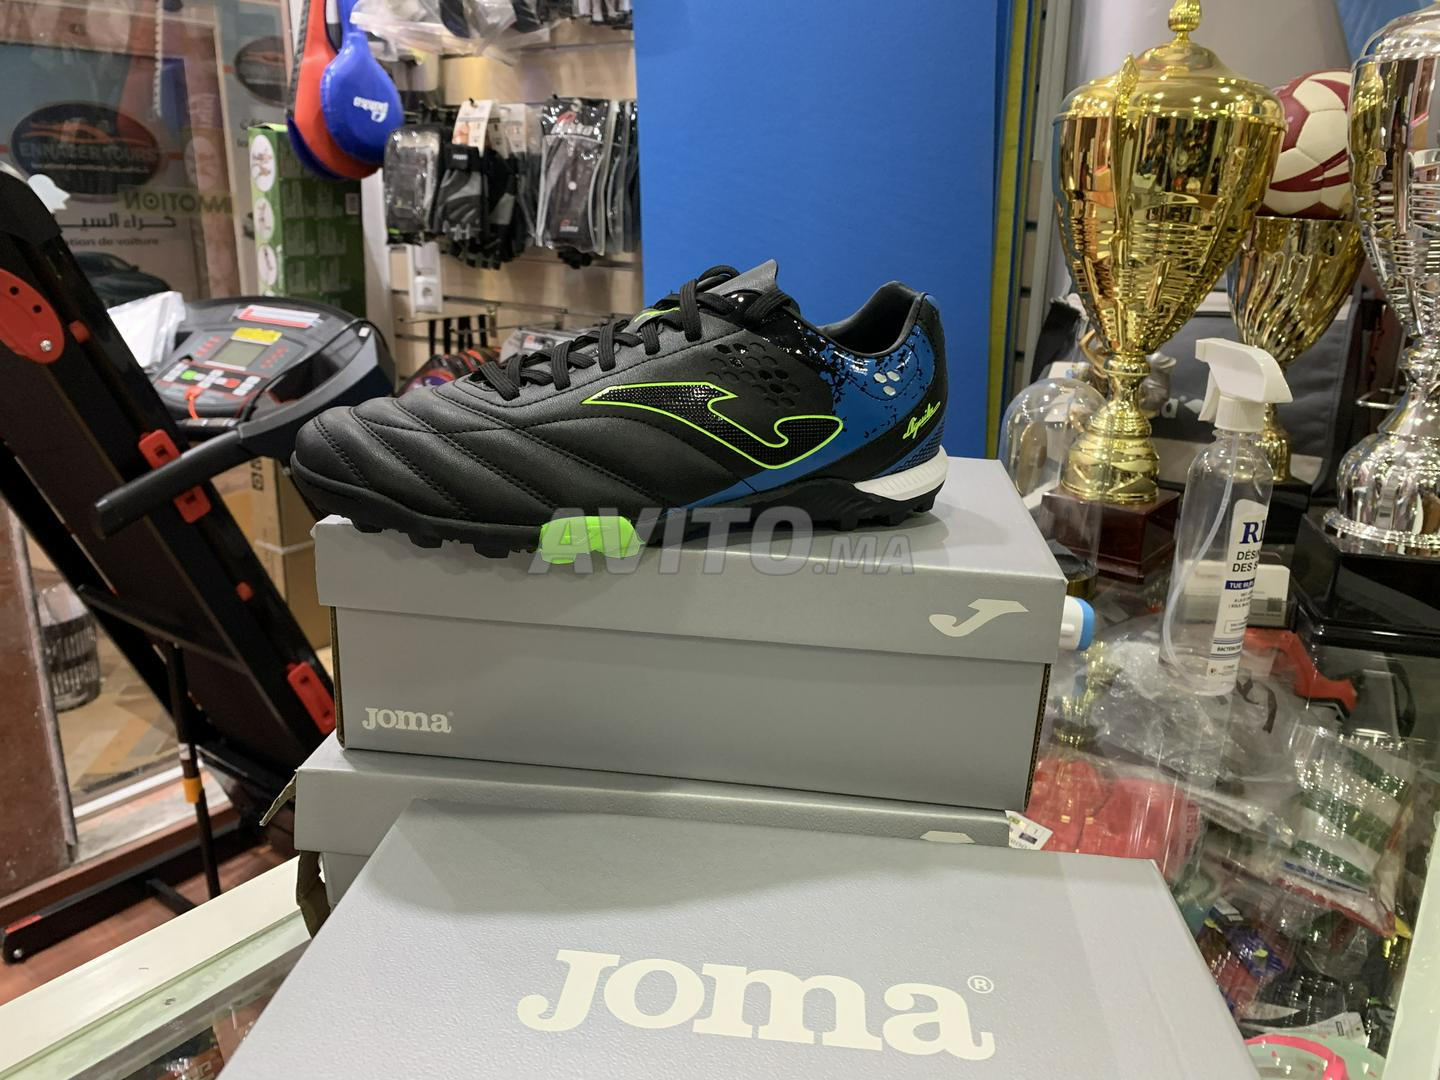 Chaussure foot joma gazon synthétique  - 4